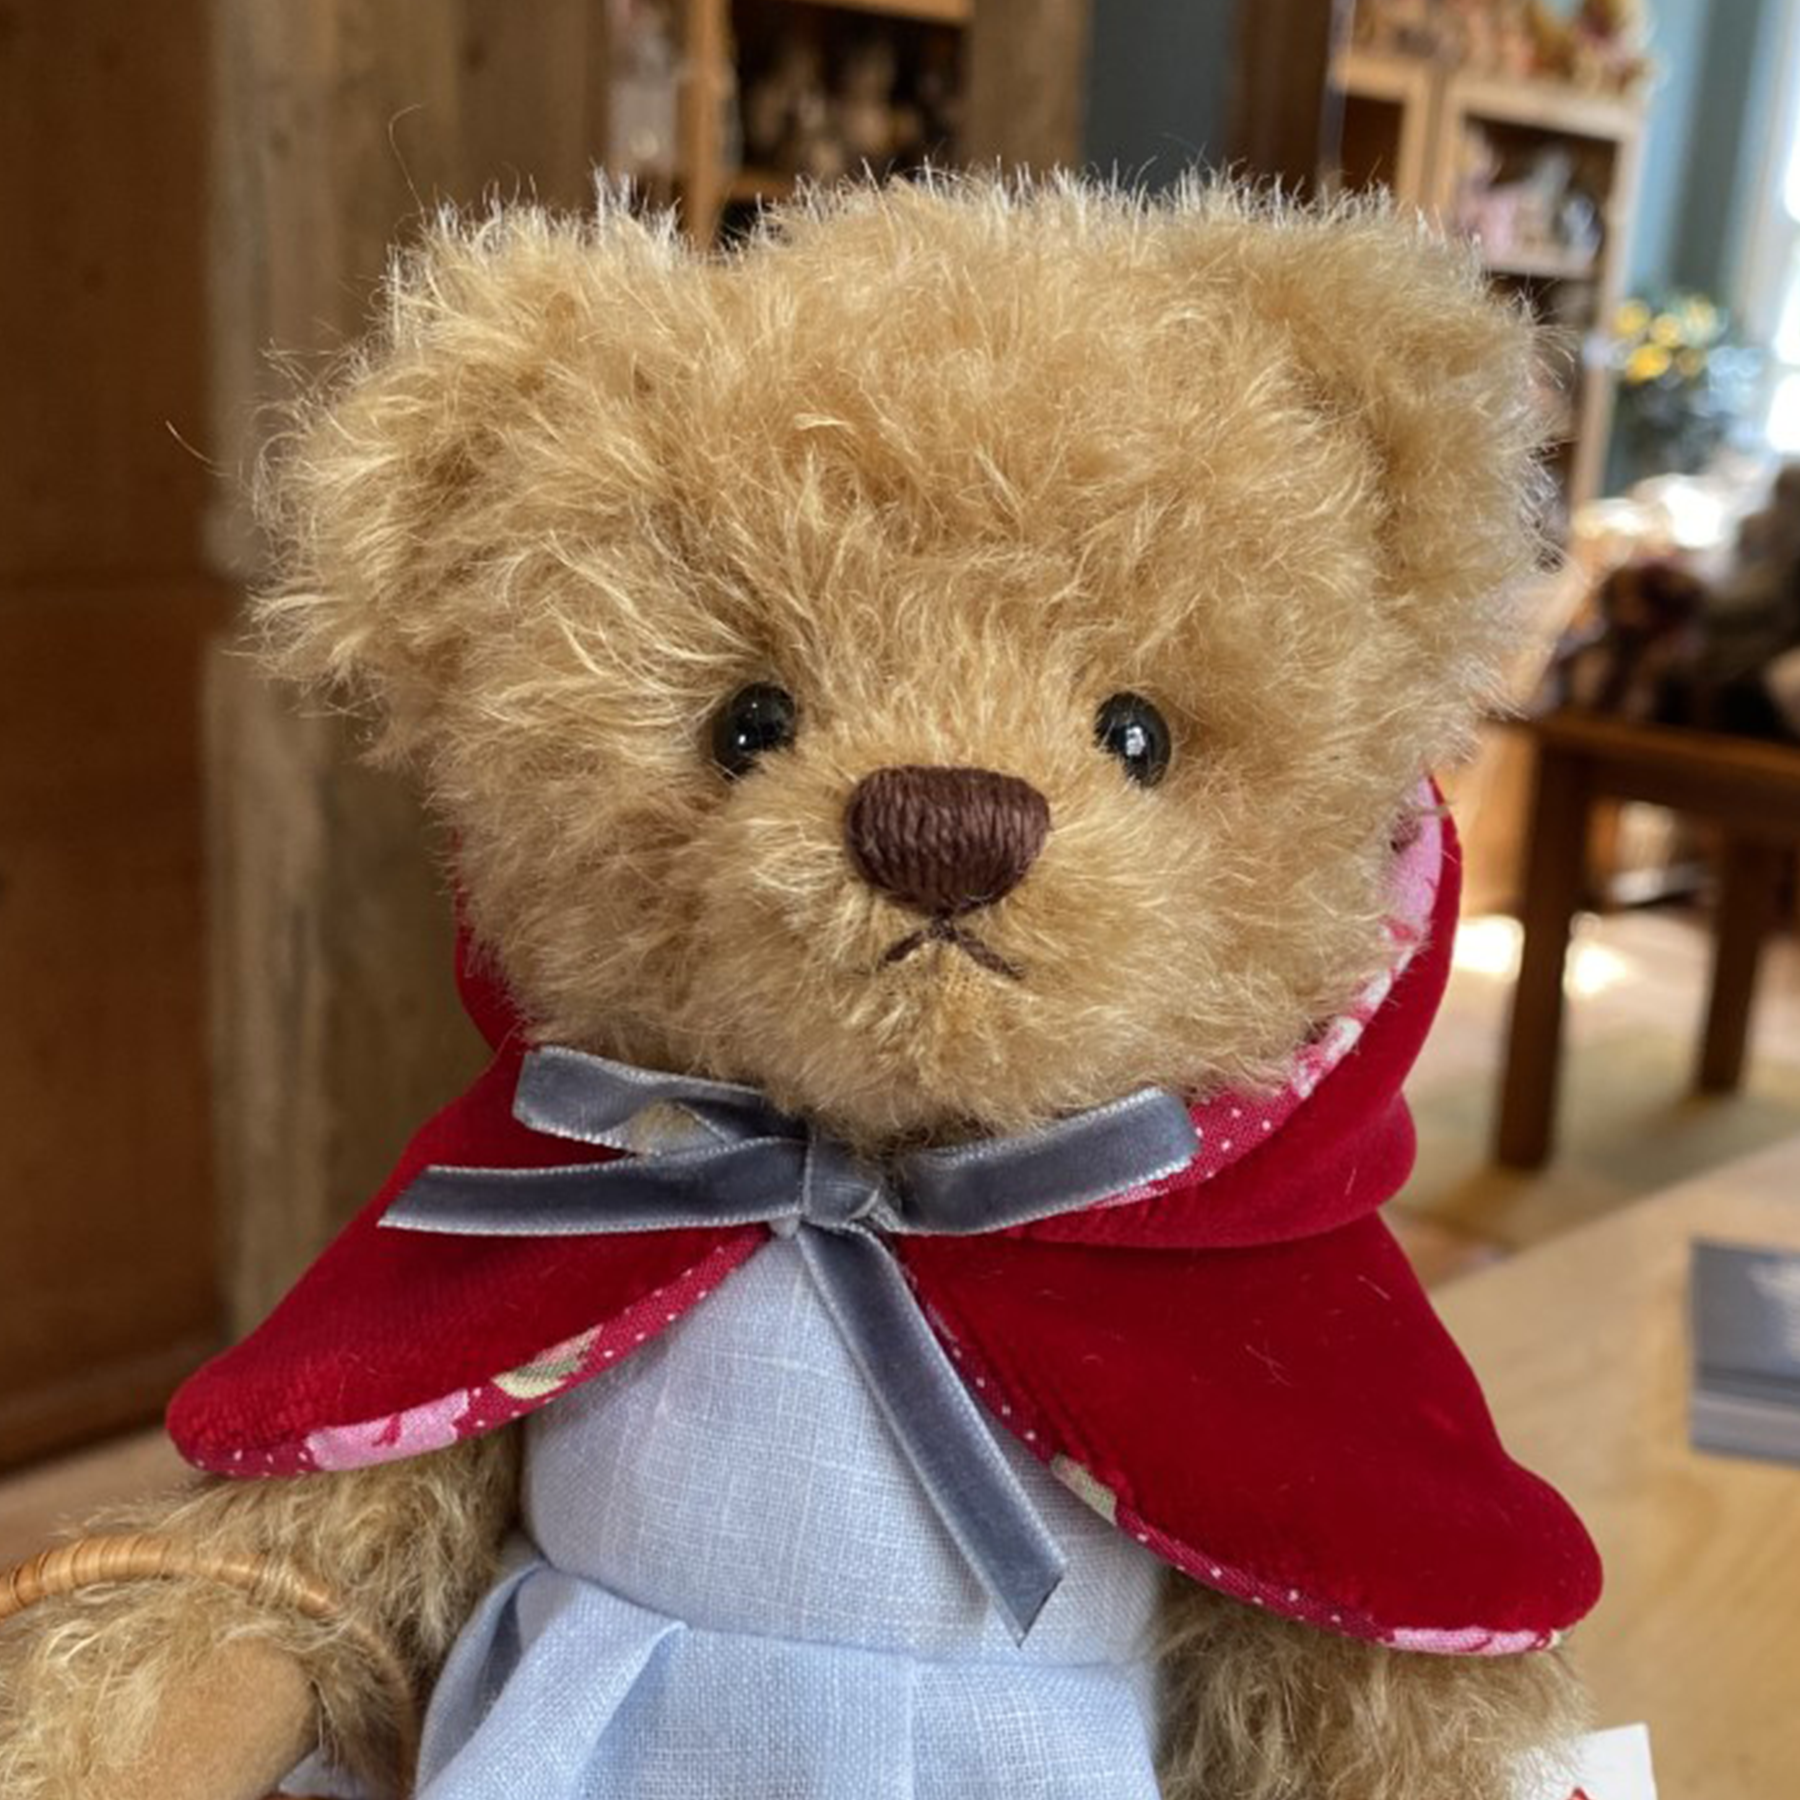 Little Red Riding Hood is beautifully soft and made from slightly wavy caramel coloured mohair. Her flat footpads allow her to stand on her own.  She is wearing a striking red velvet lined cape and a pretty blue linen dress she carries a fabric lined wicker basket